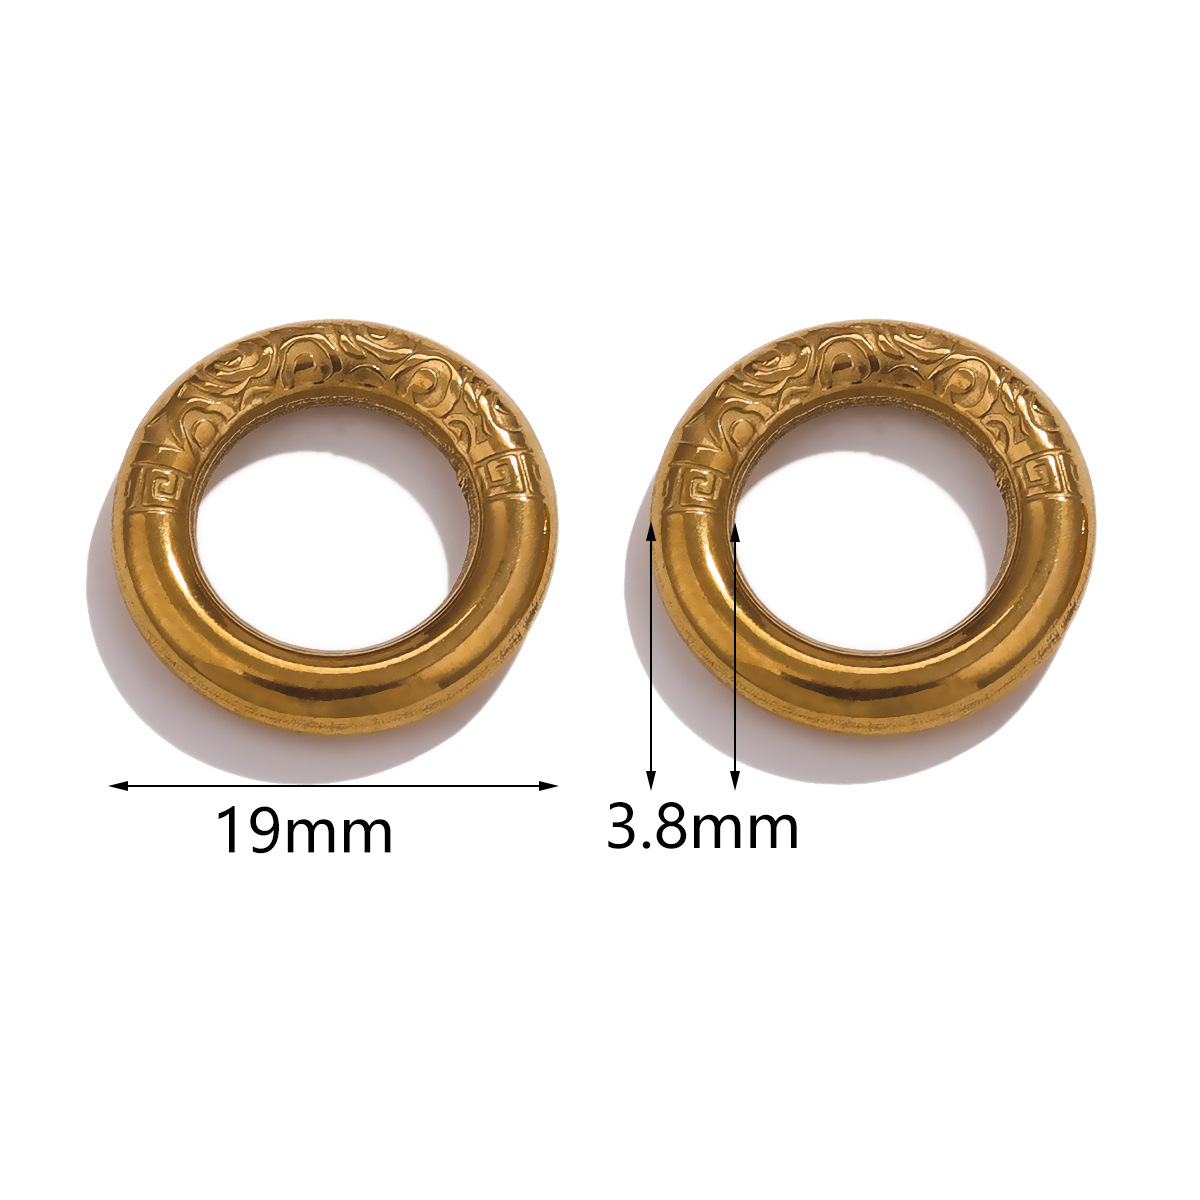 4:19mm - Gold